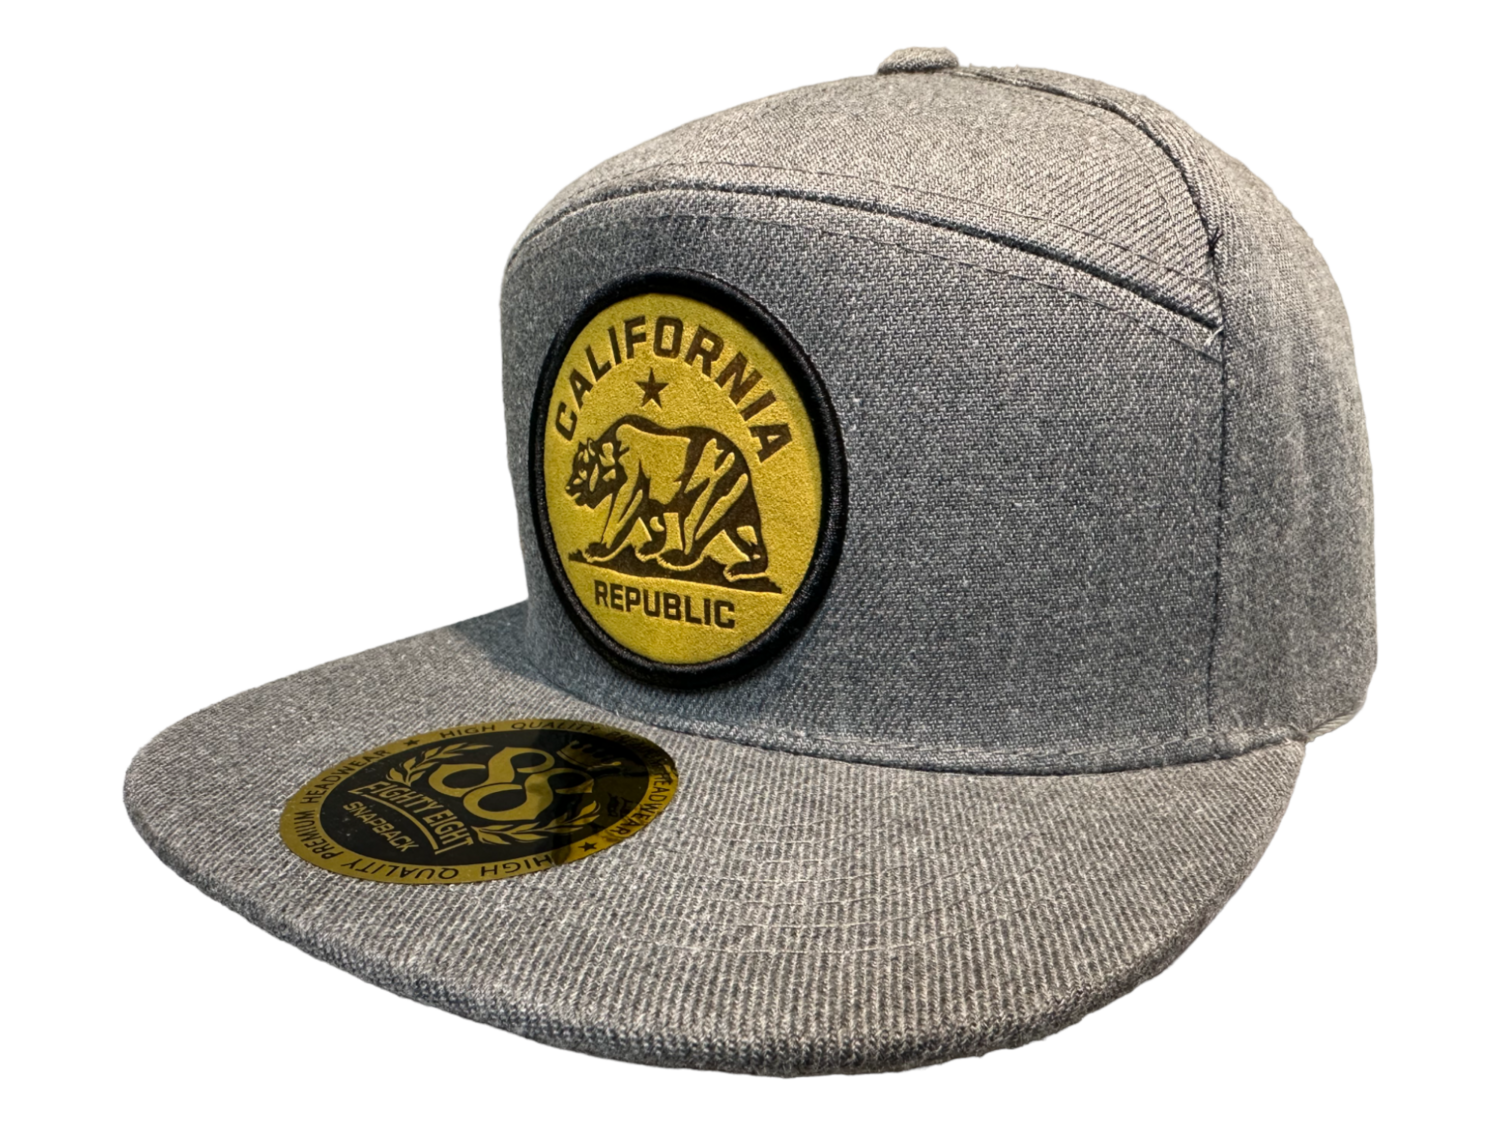 California Republic Round Patch Snapback 6 Panel Adjustable Snap Fit Hat